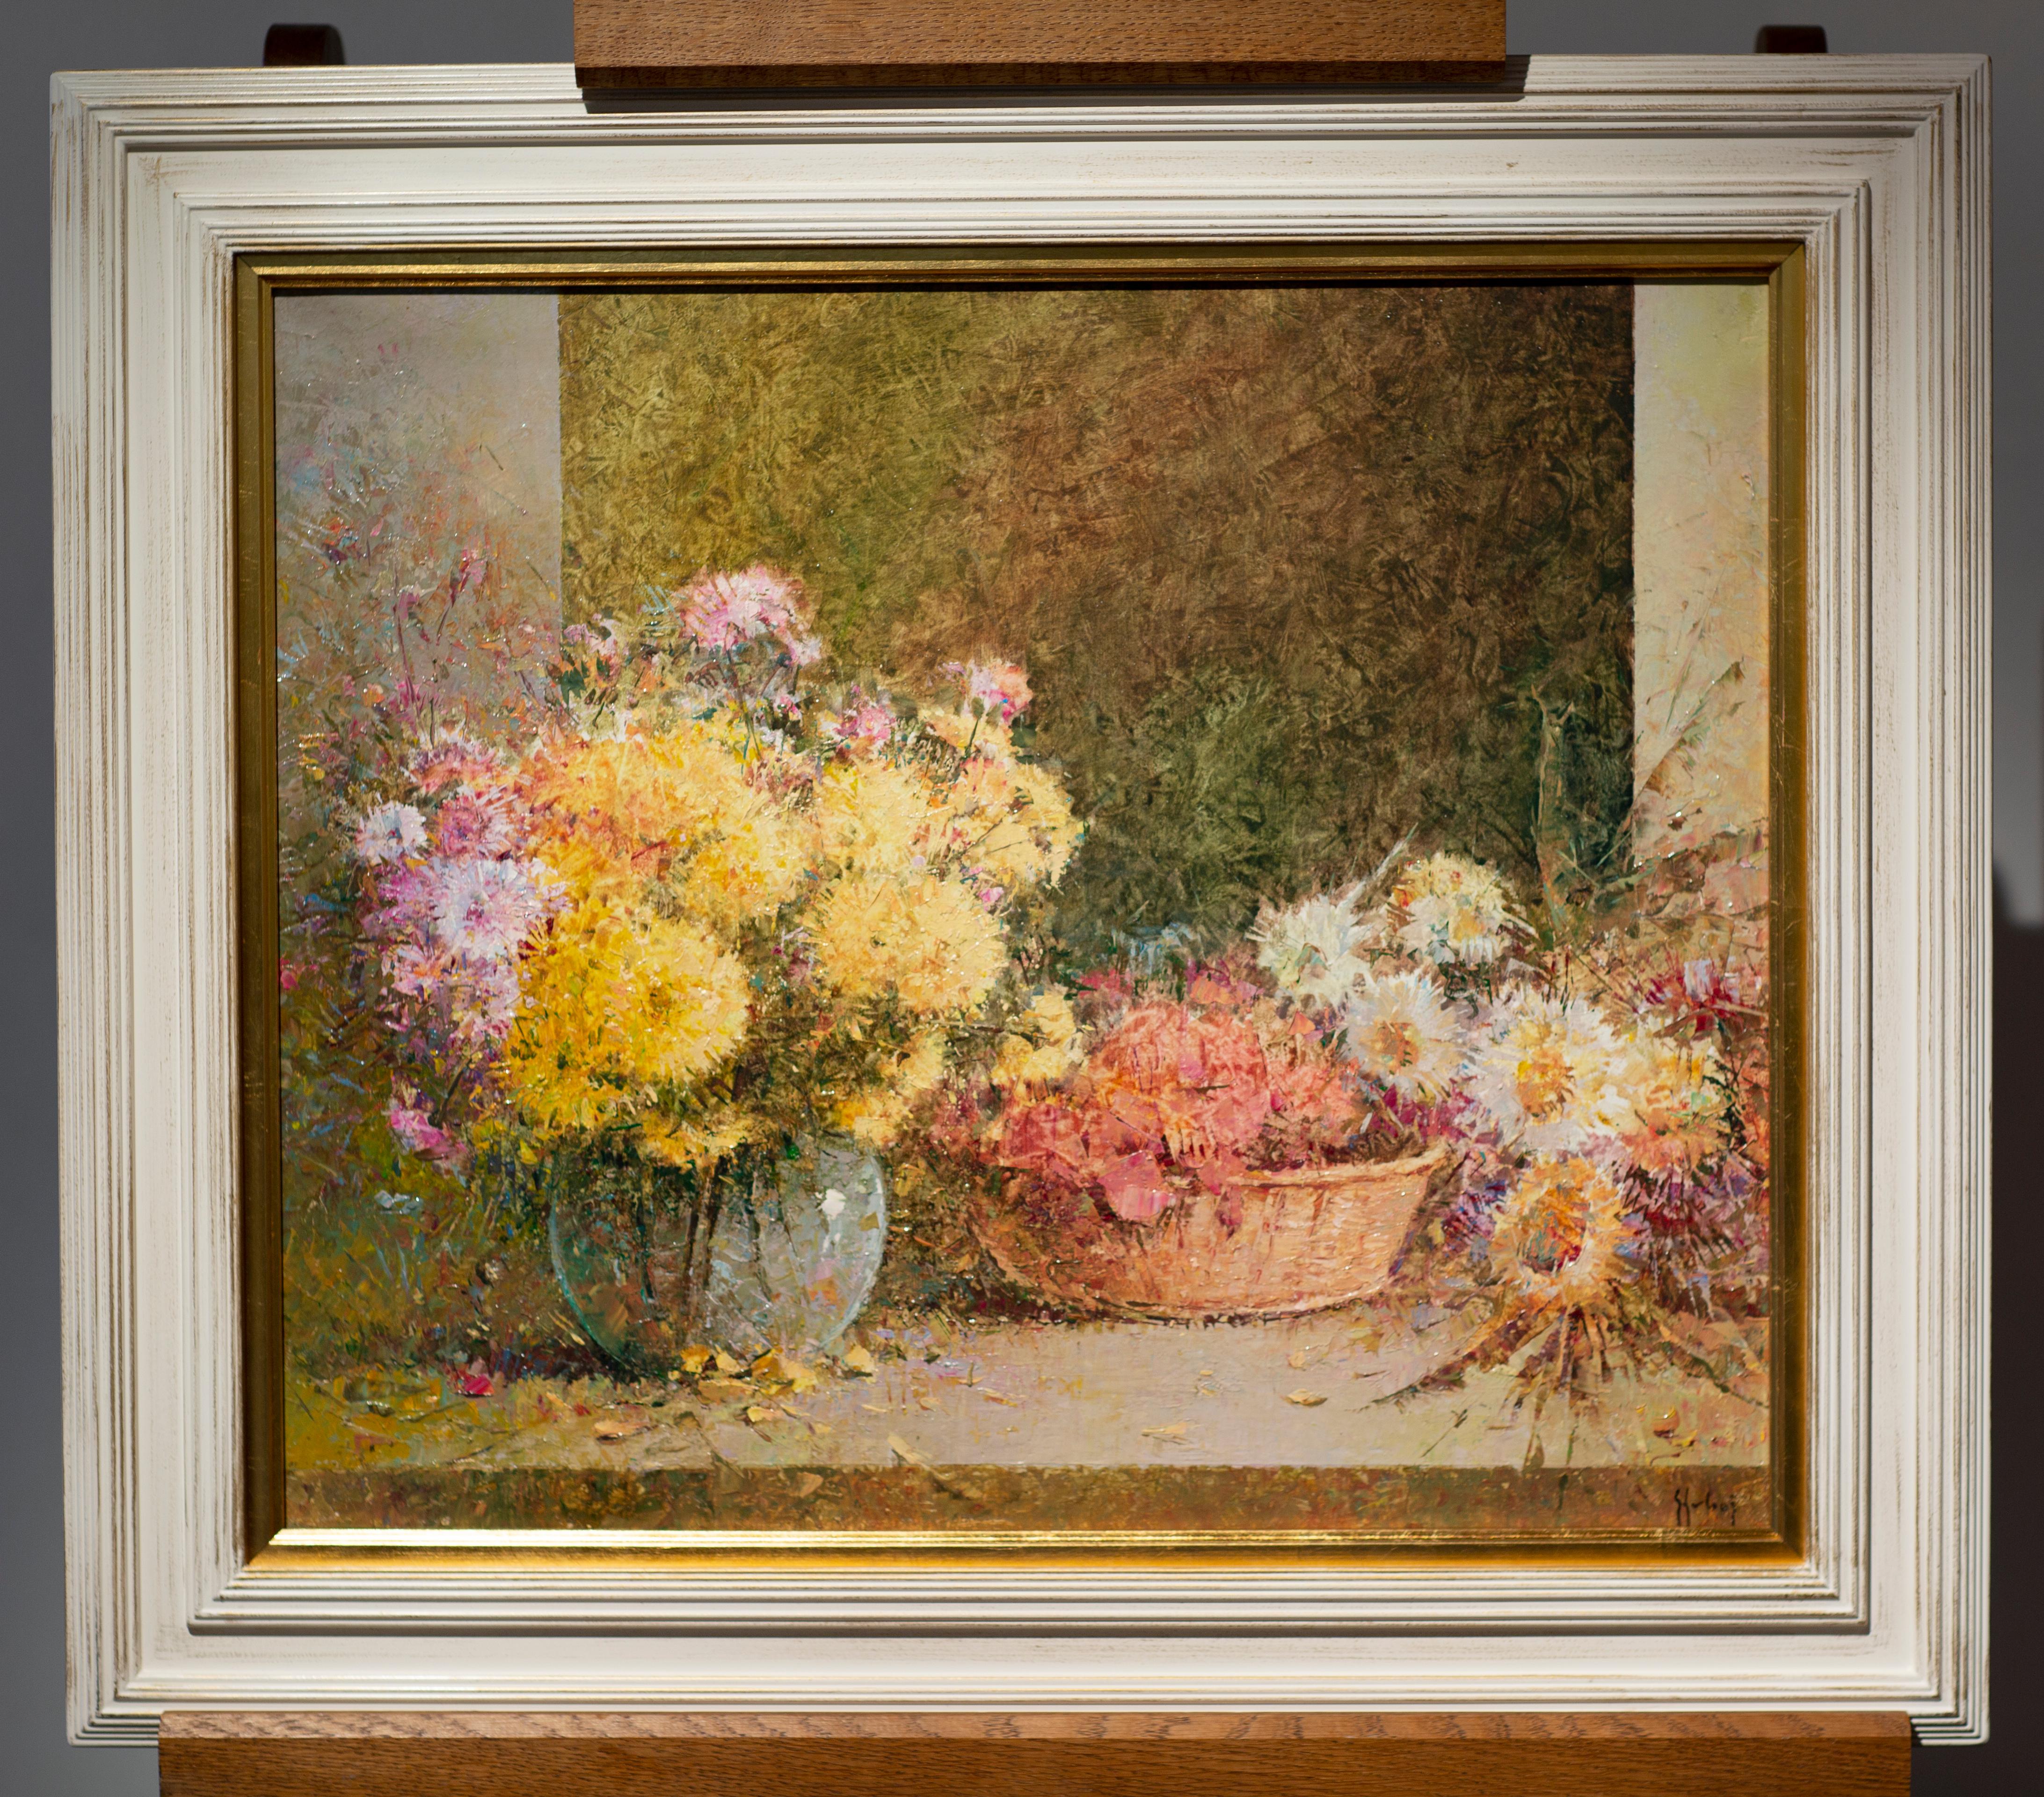 'Collecting the Wildflowers' Contemporary Still Life painting, yellow, pink - Painting by Helios Gisbert